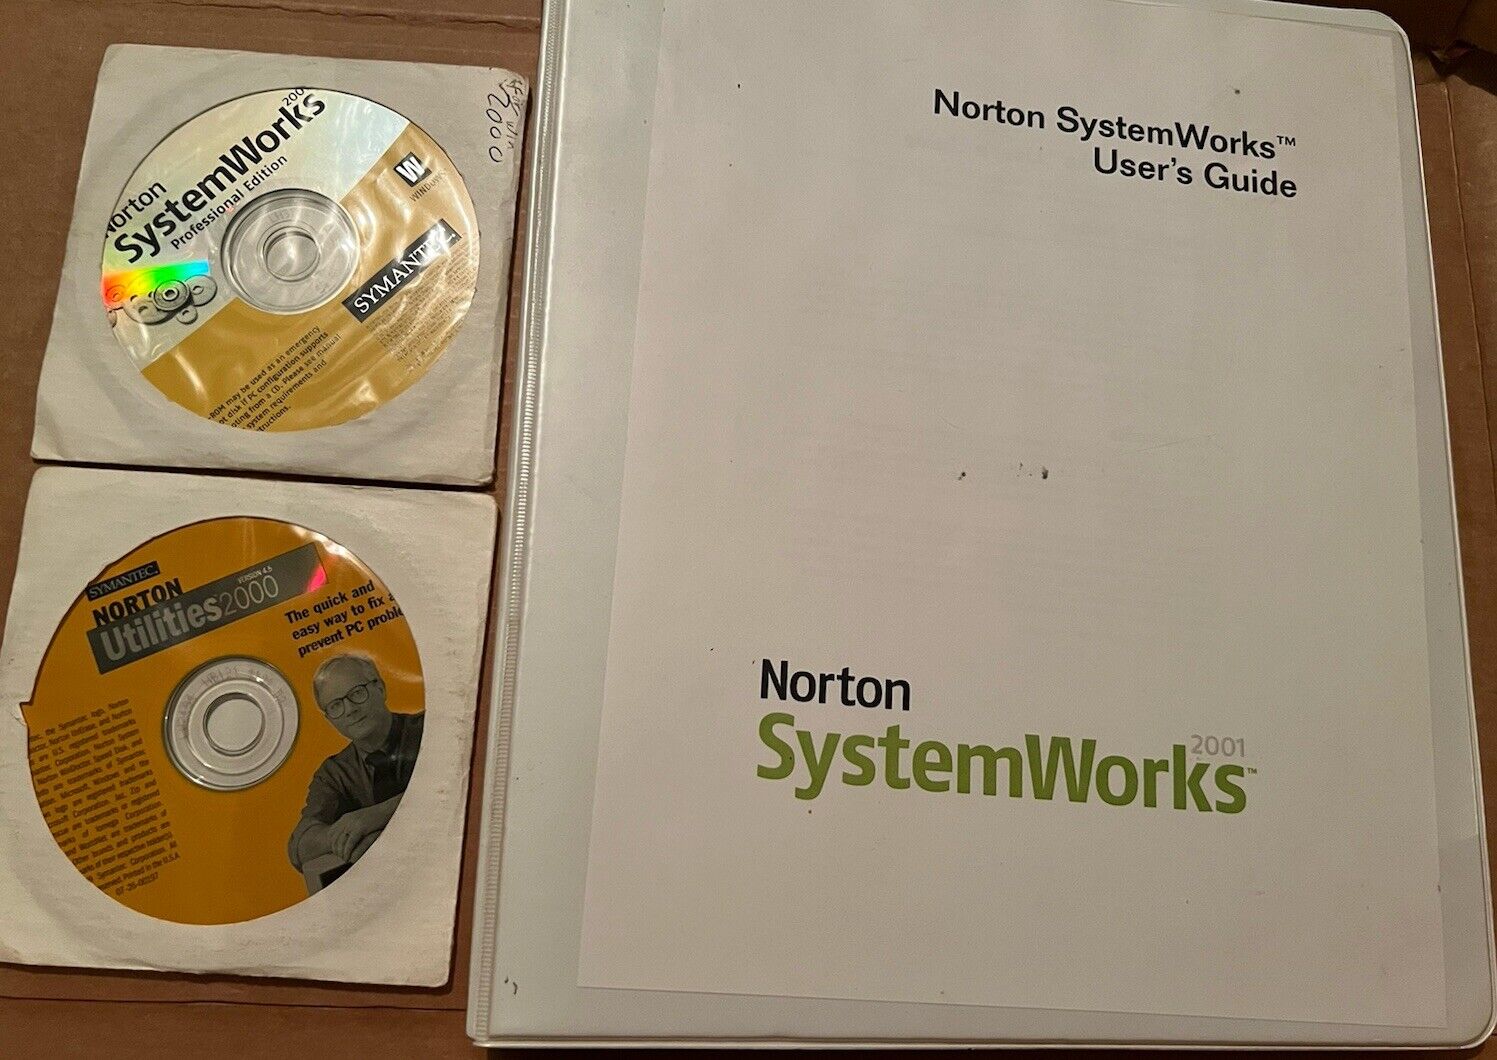 Norton System Works 2001 w/ Users Guide and Norton Utilities 2000 (version 4.5)